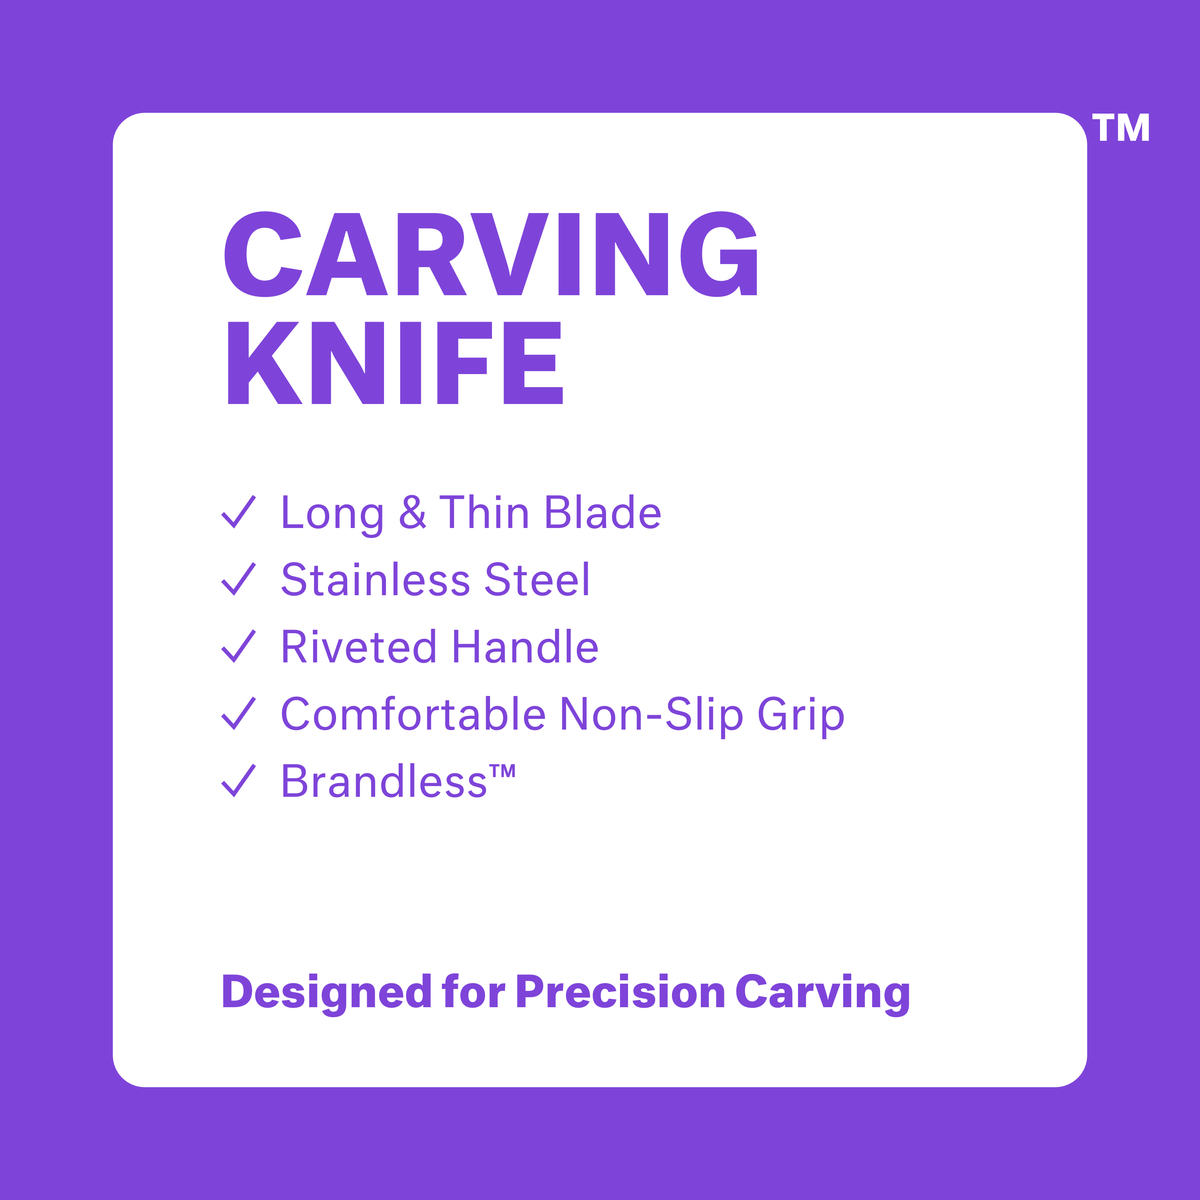 Carving Knife. Long &amp; thin blade. Stainless steel. Riveted handle. Comfortable non-slip grip. Brandless. Designed for precision carving.